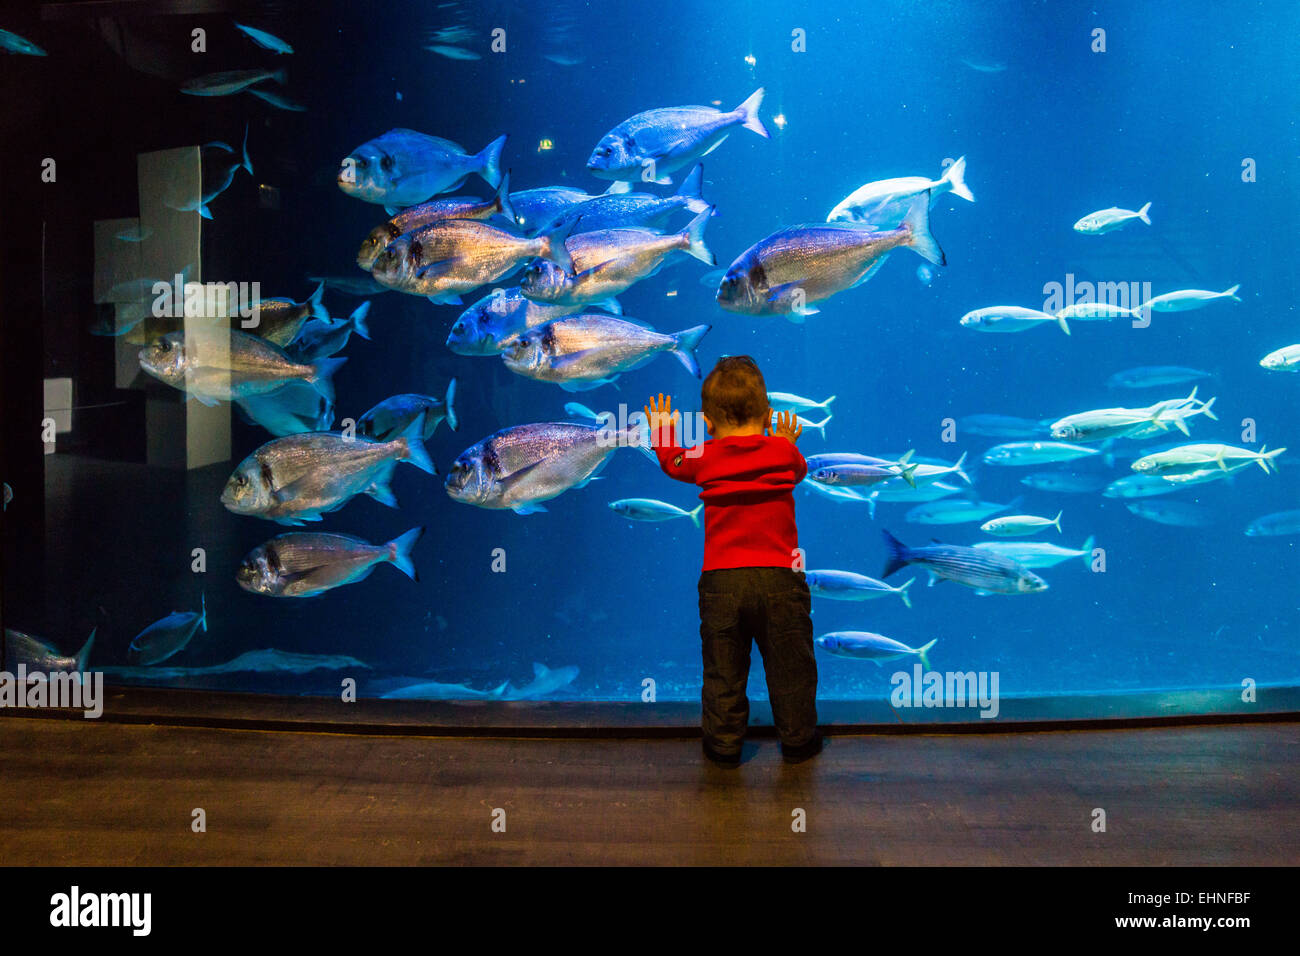 Baby boy watching fishes in an aquarium. Stock Photo